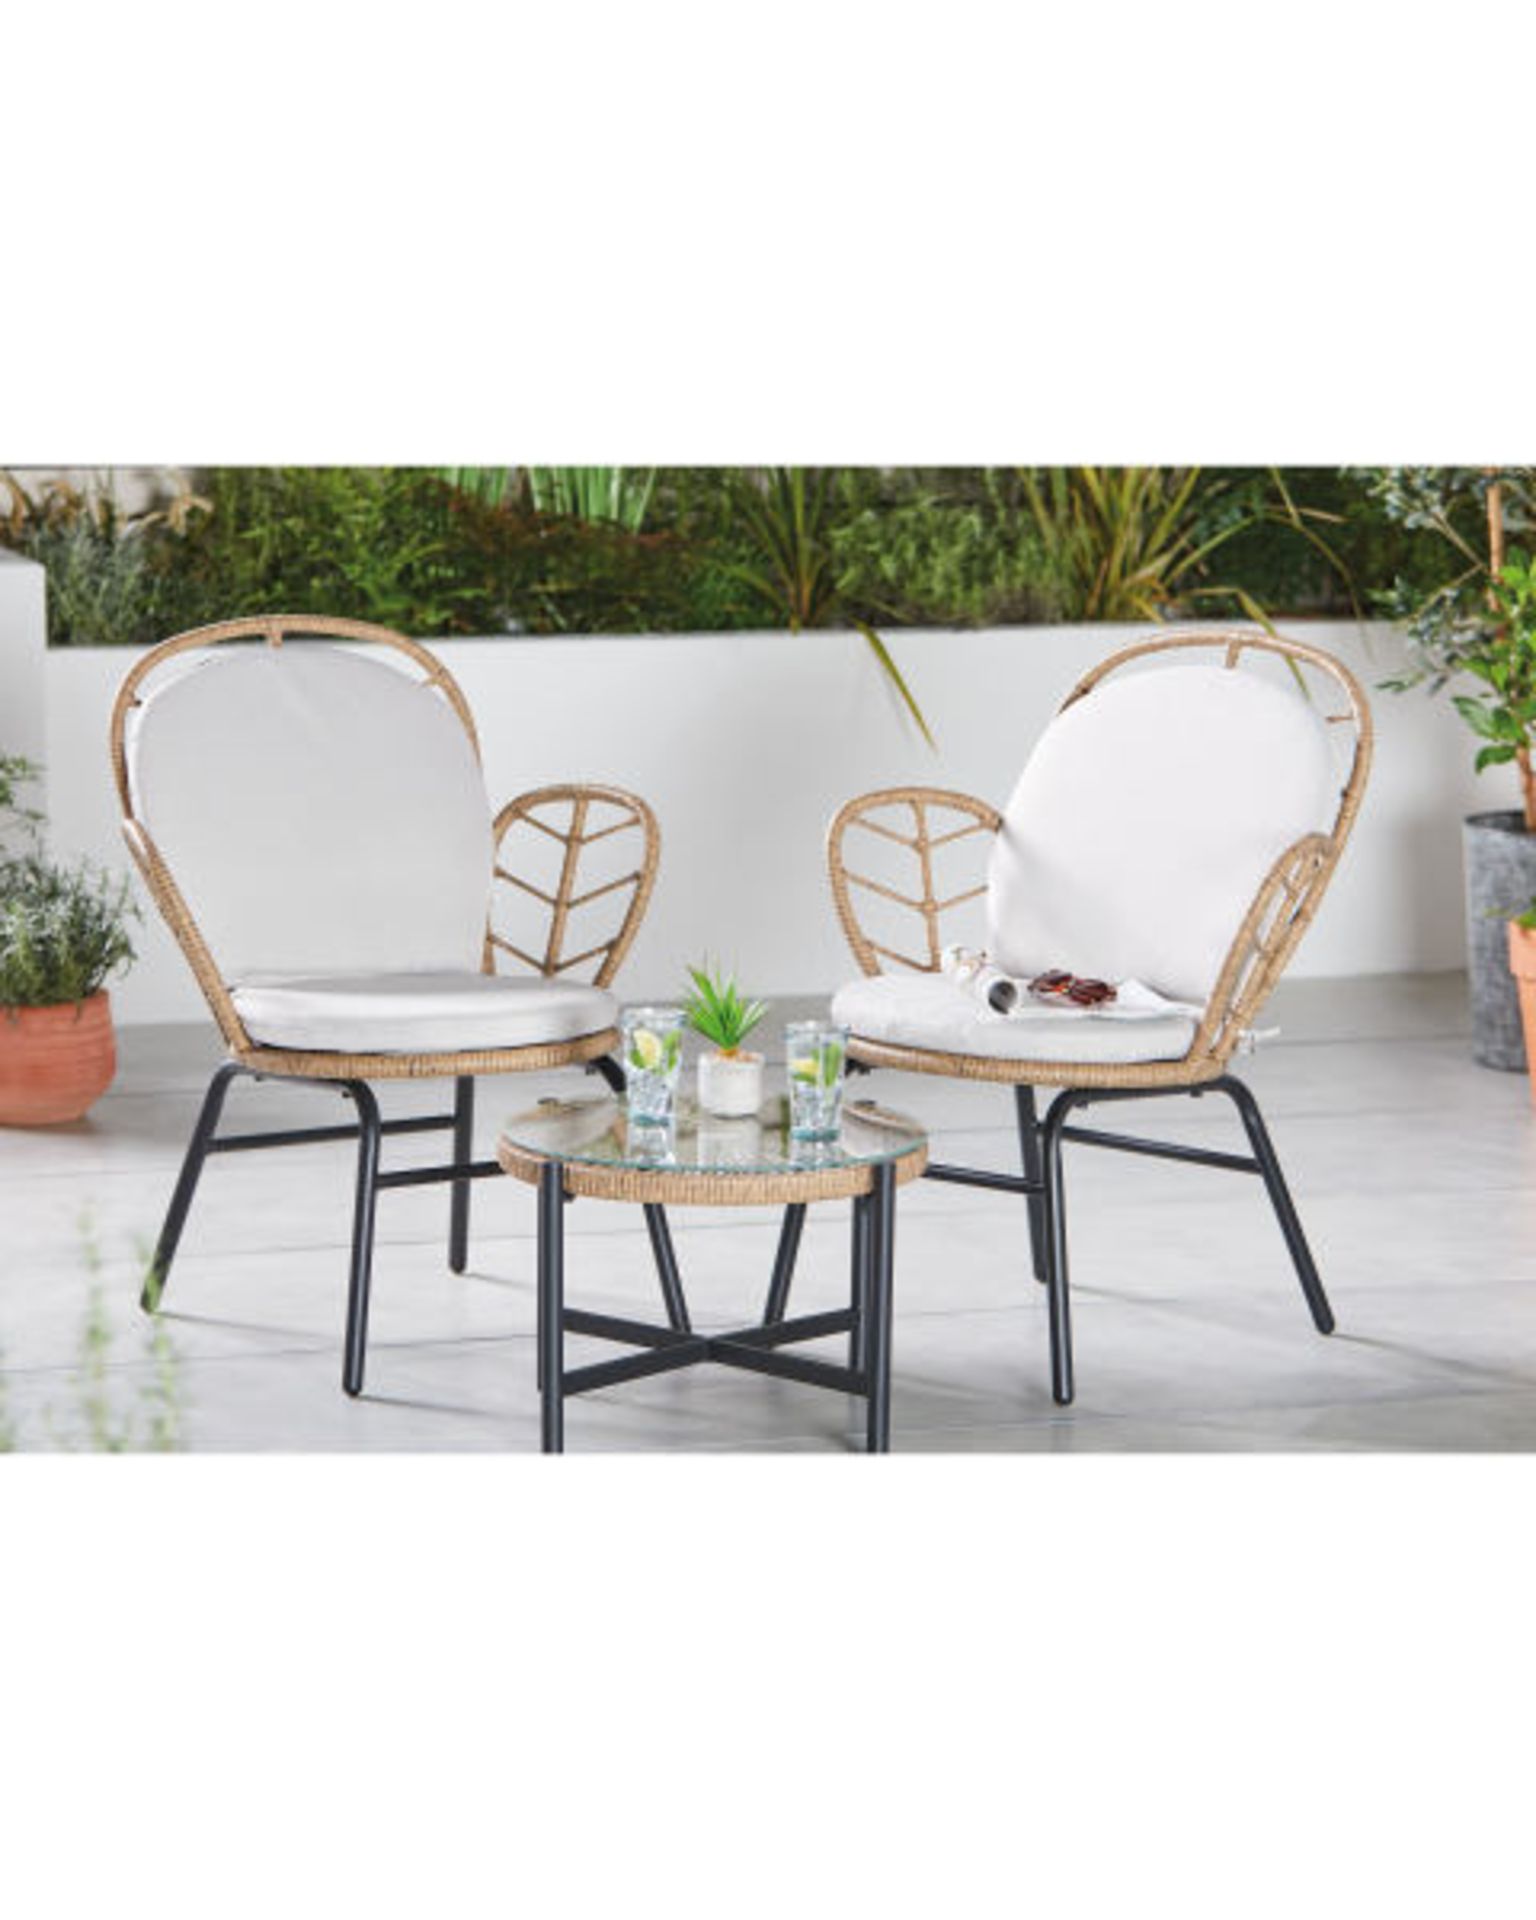 Luxury Petal Rattan Bistro Set. Transform your garden and create a space where you can relax with - Image 3 of 4